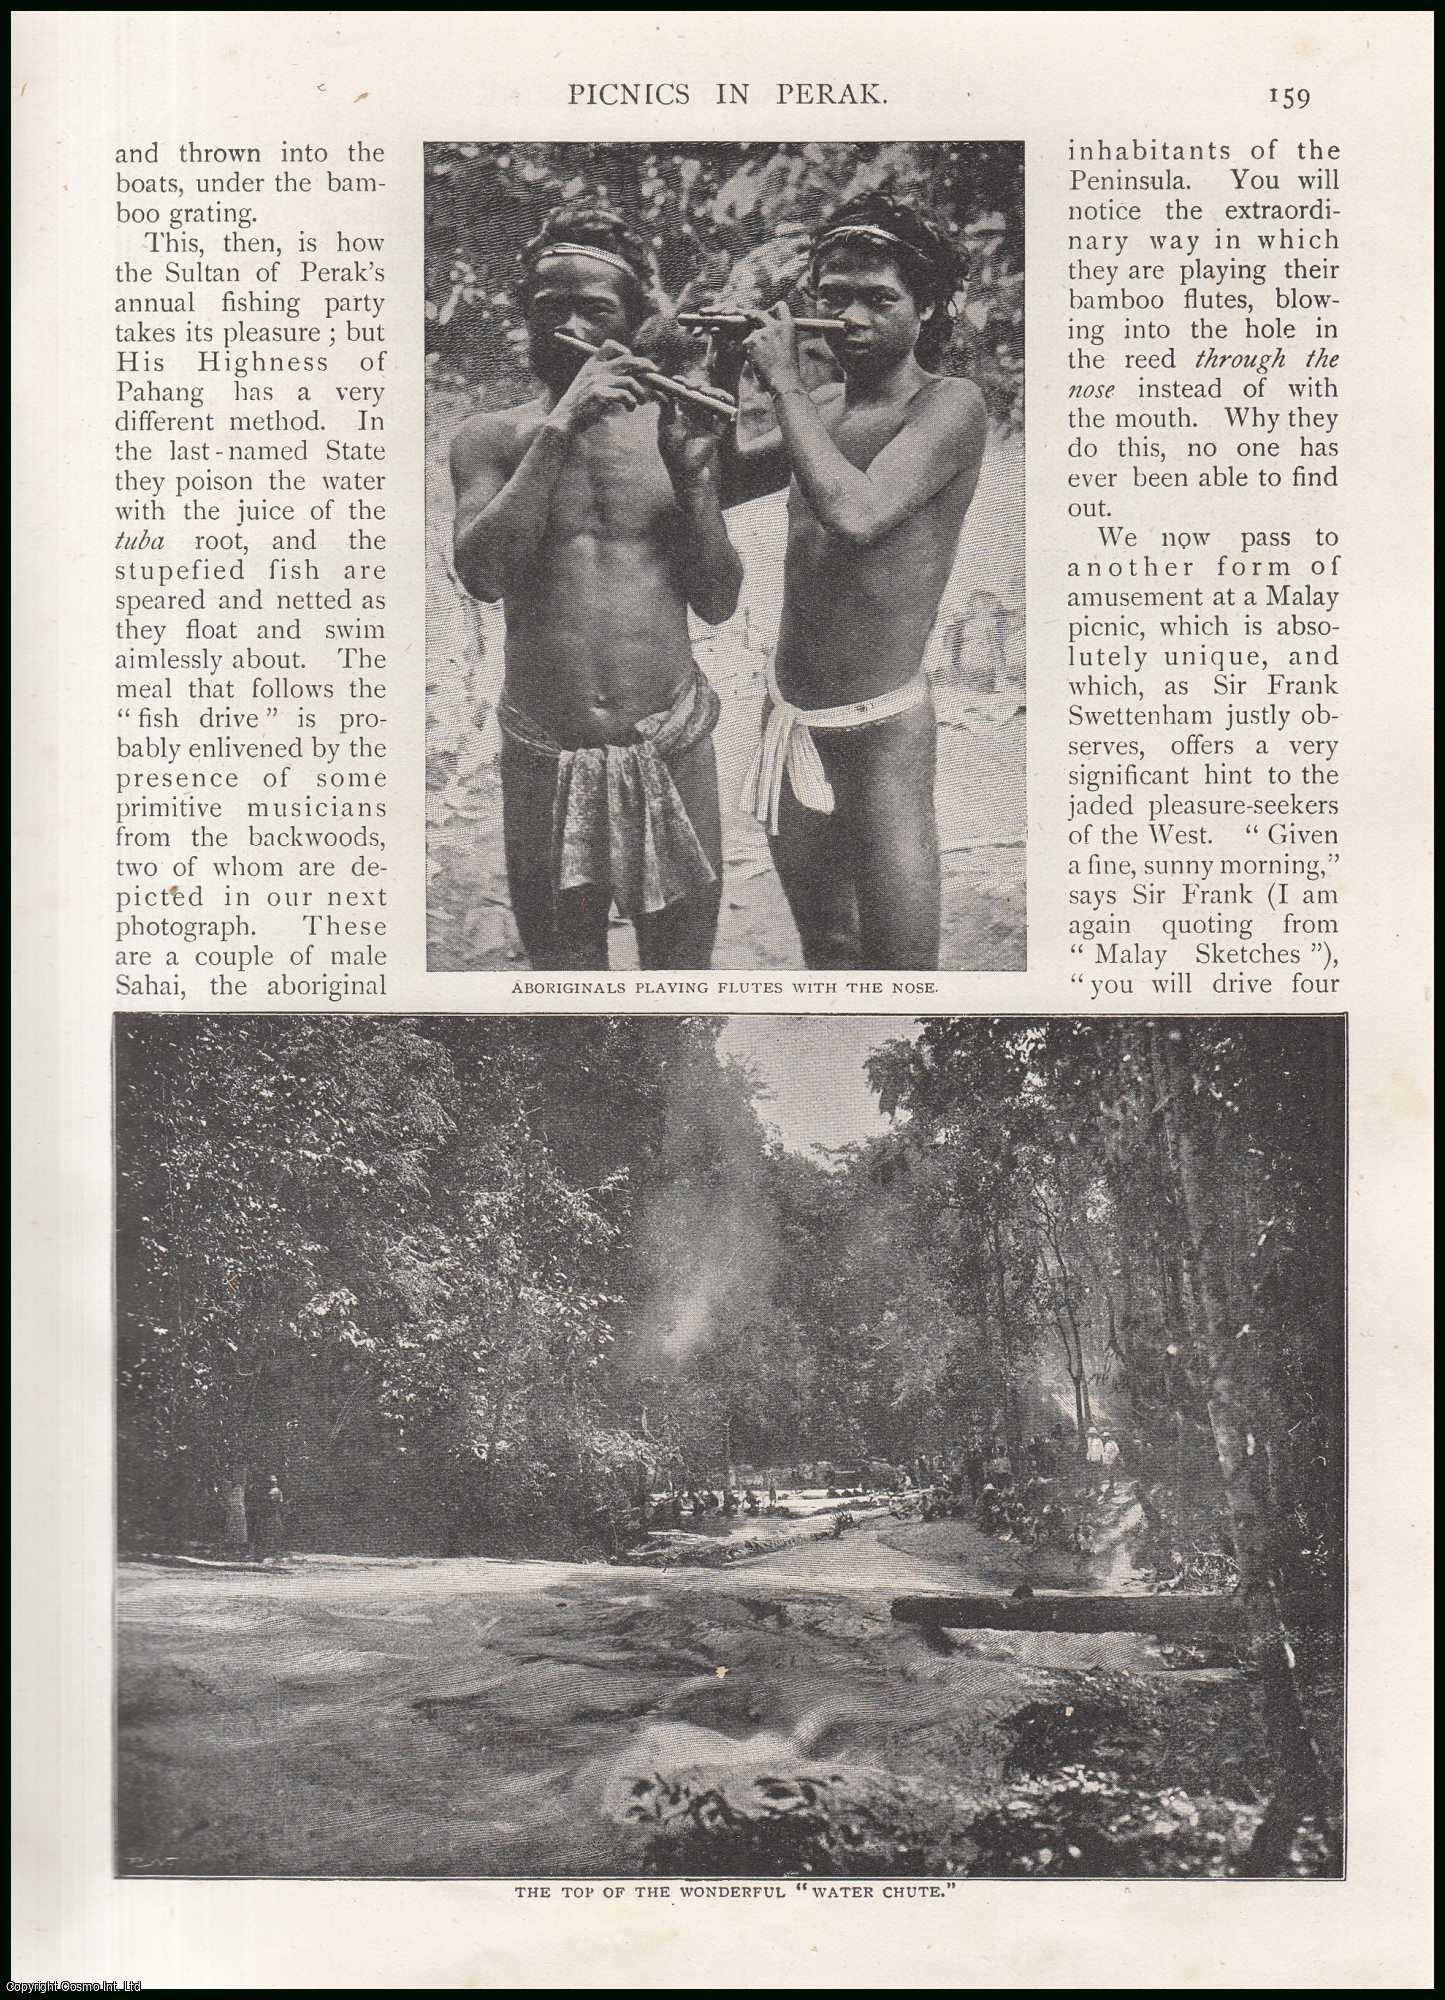 Emily Howard - Picnics in Perak : An account of a fish drive picnic & water shoot in Malay An uncommon original article from the Wide World Magazine, 1898.